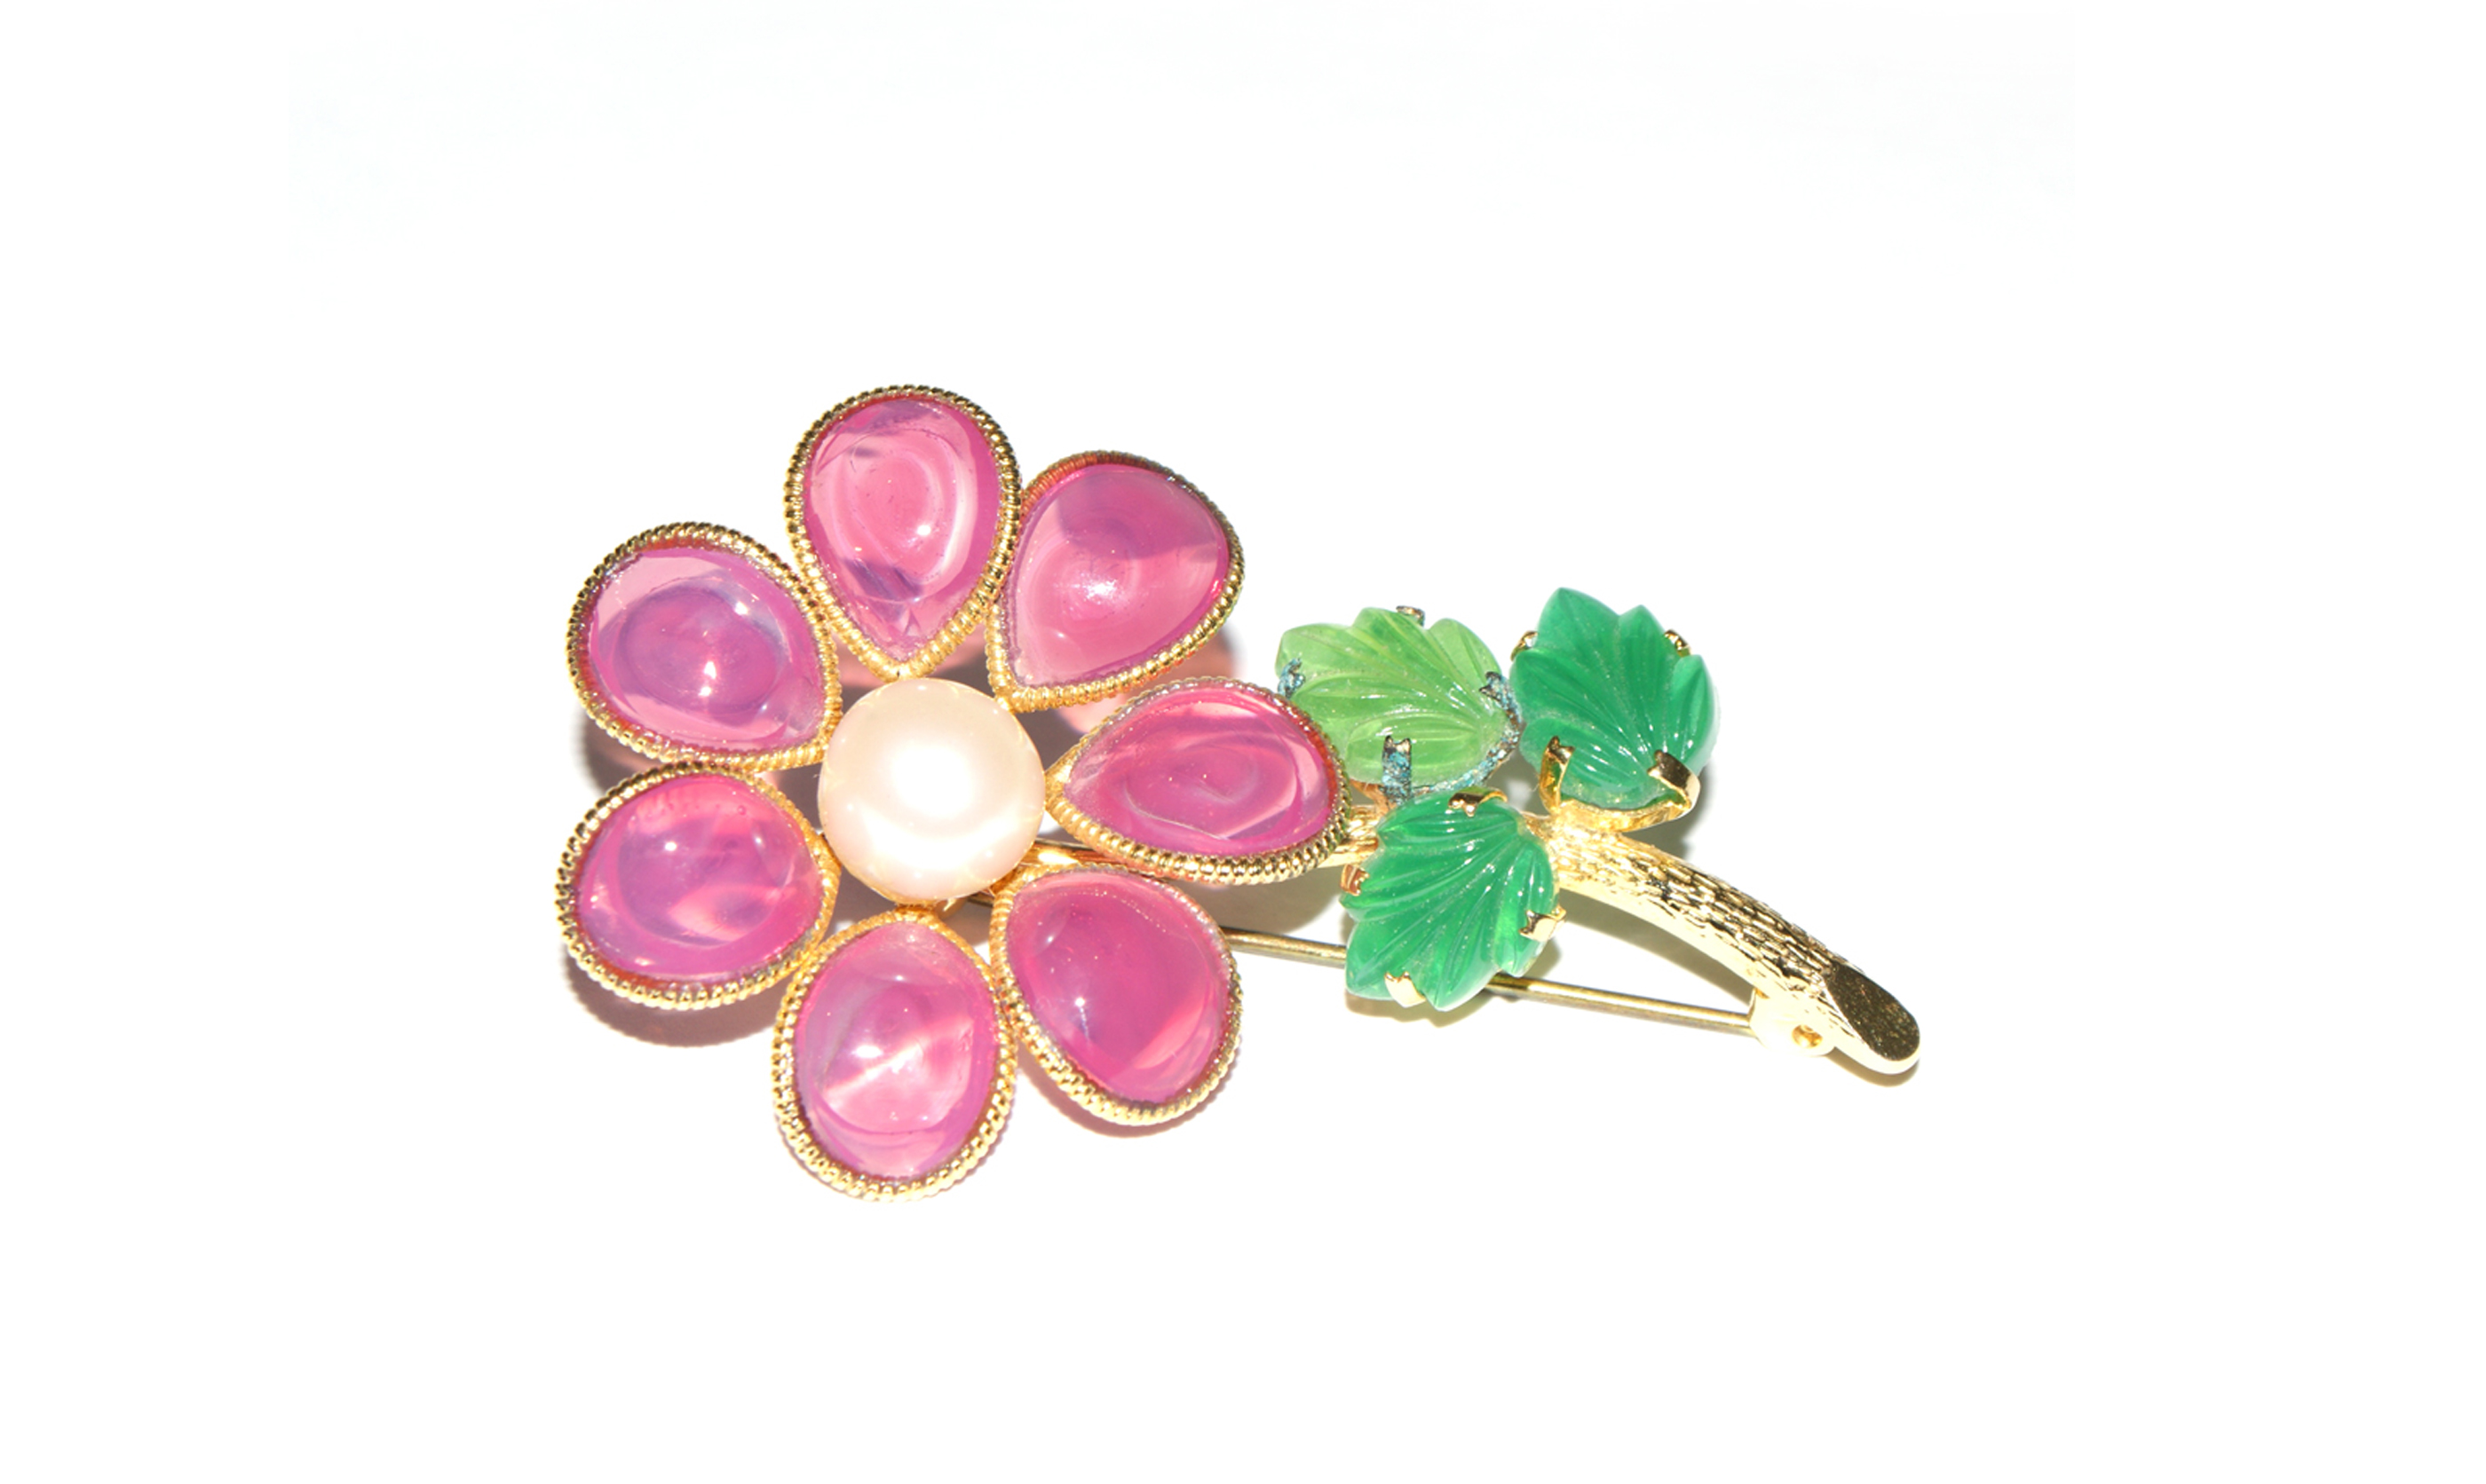 Brooches are Making a Comeback